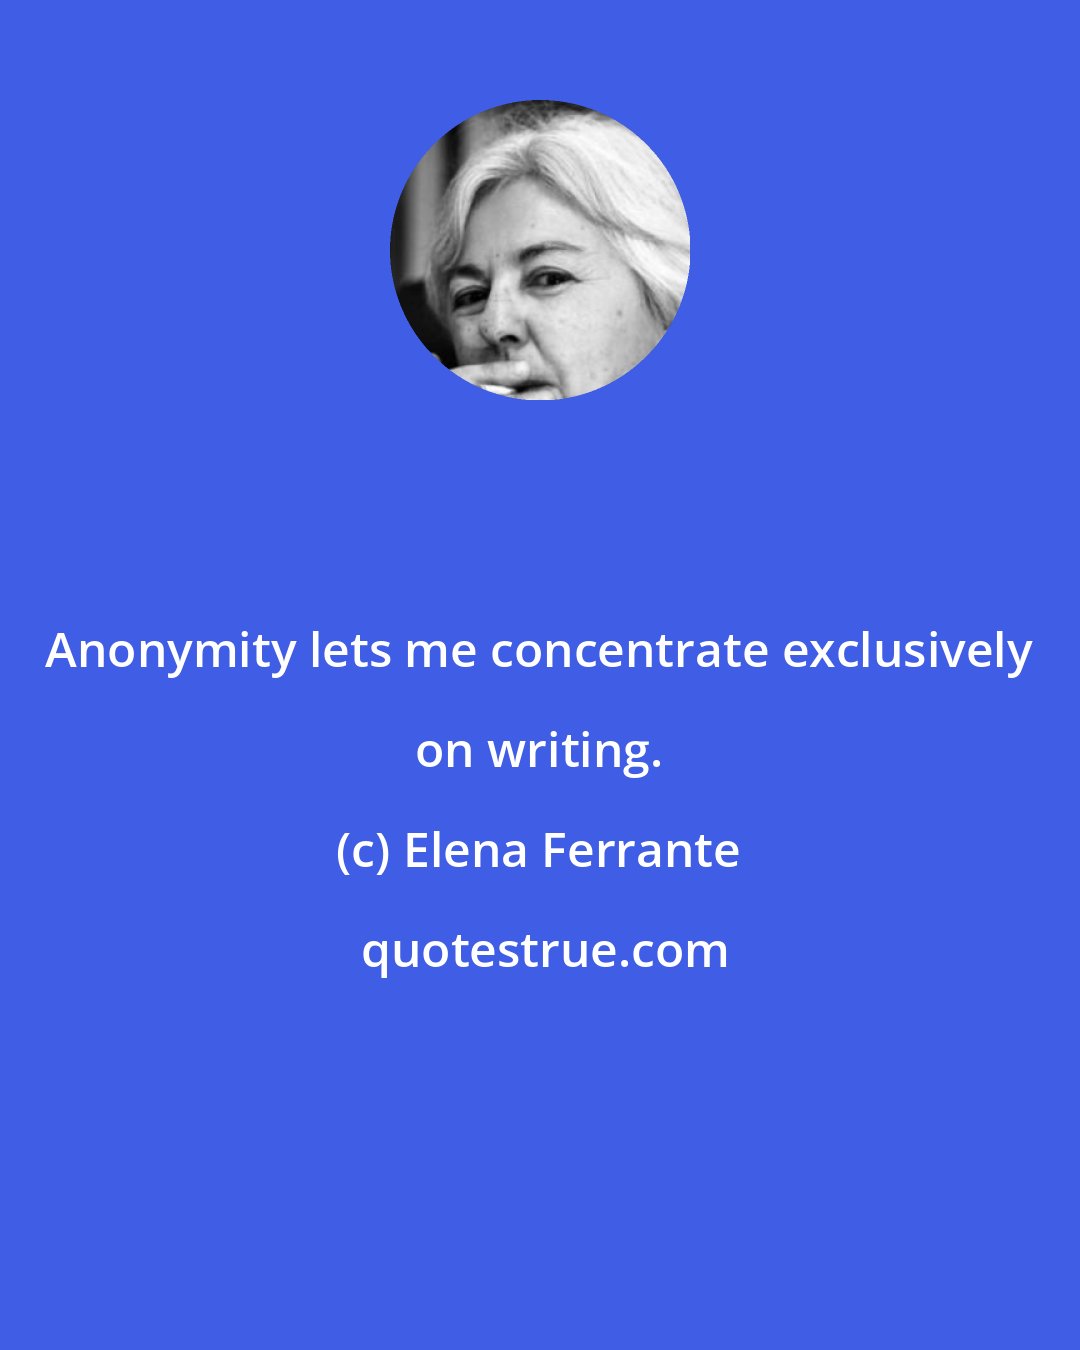 Elena Ferrante: Anonymity lets me concentrate exclusively on writing.